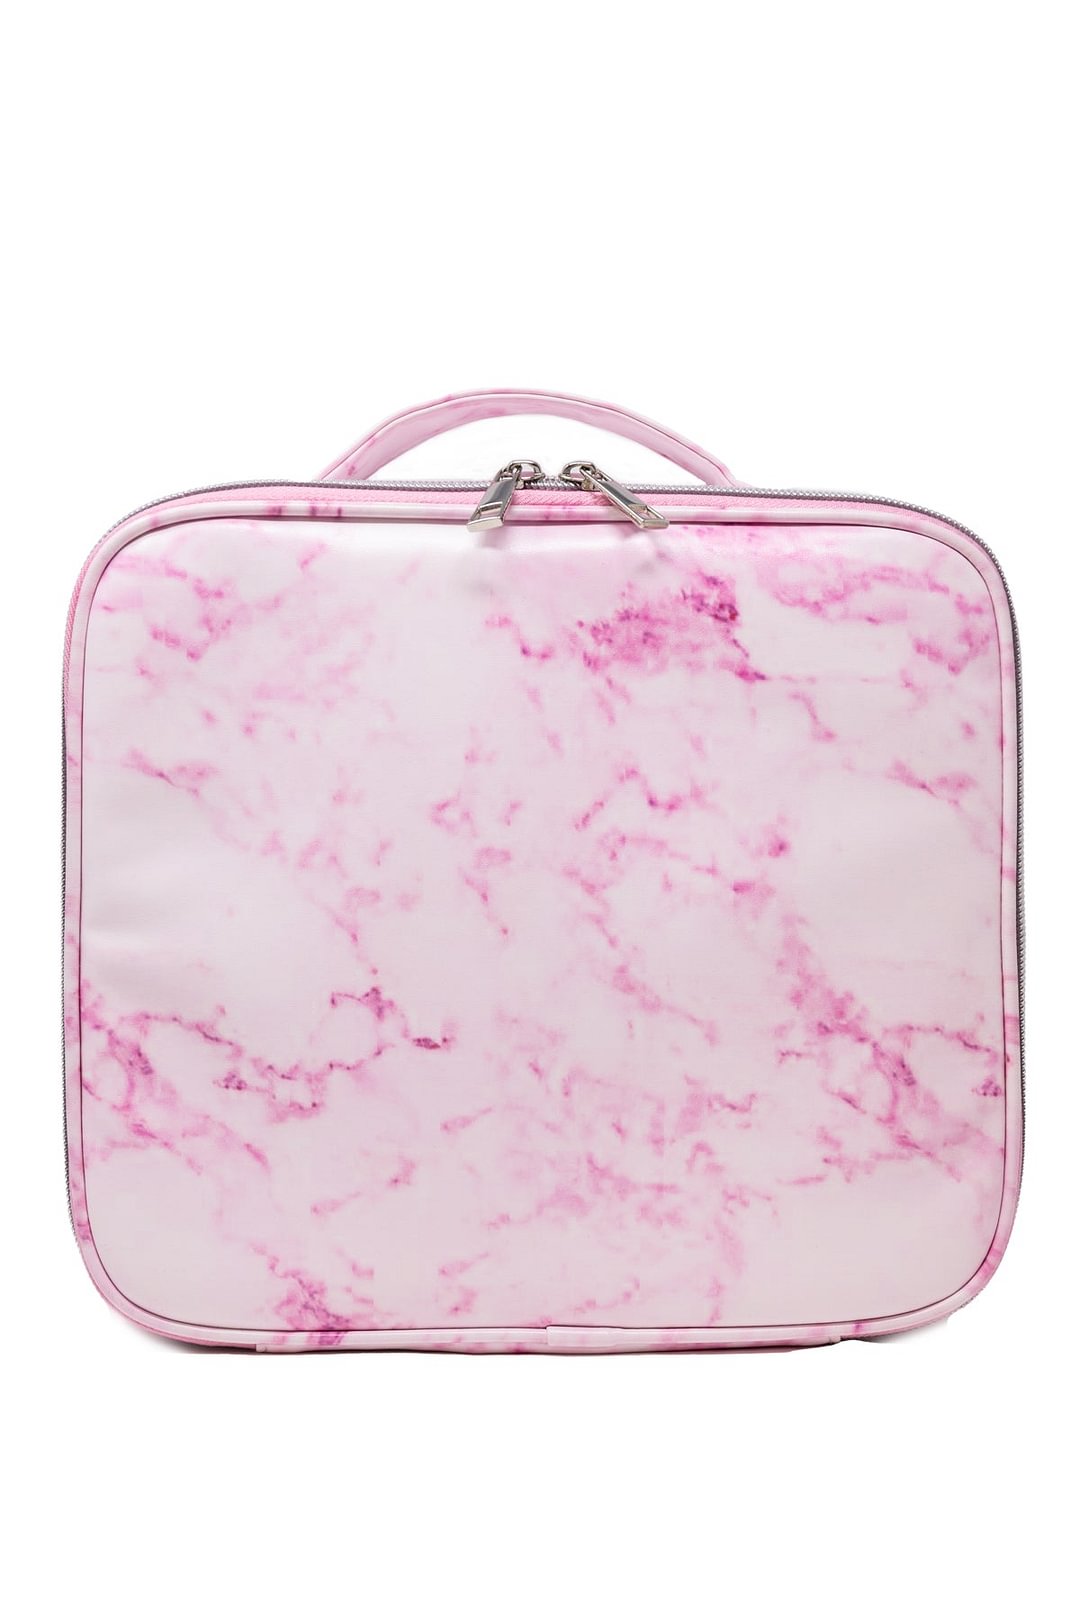 No Time To Spare Pink Marble Makeup Bag shopify LILYELF